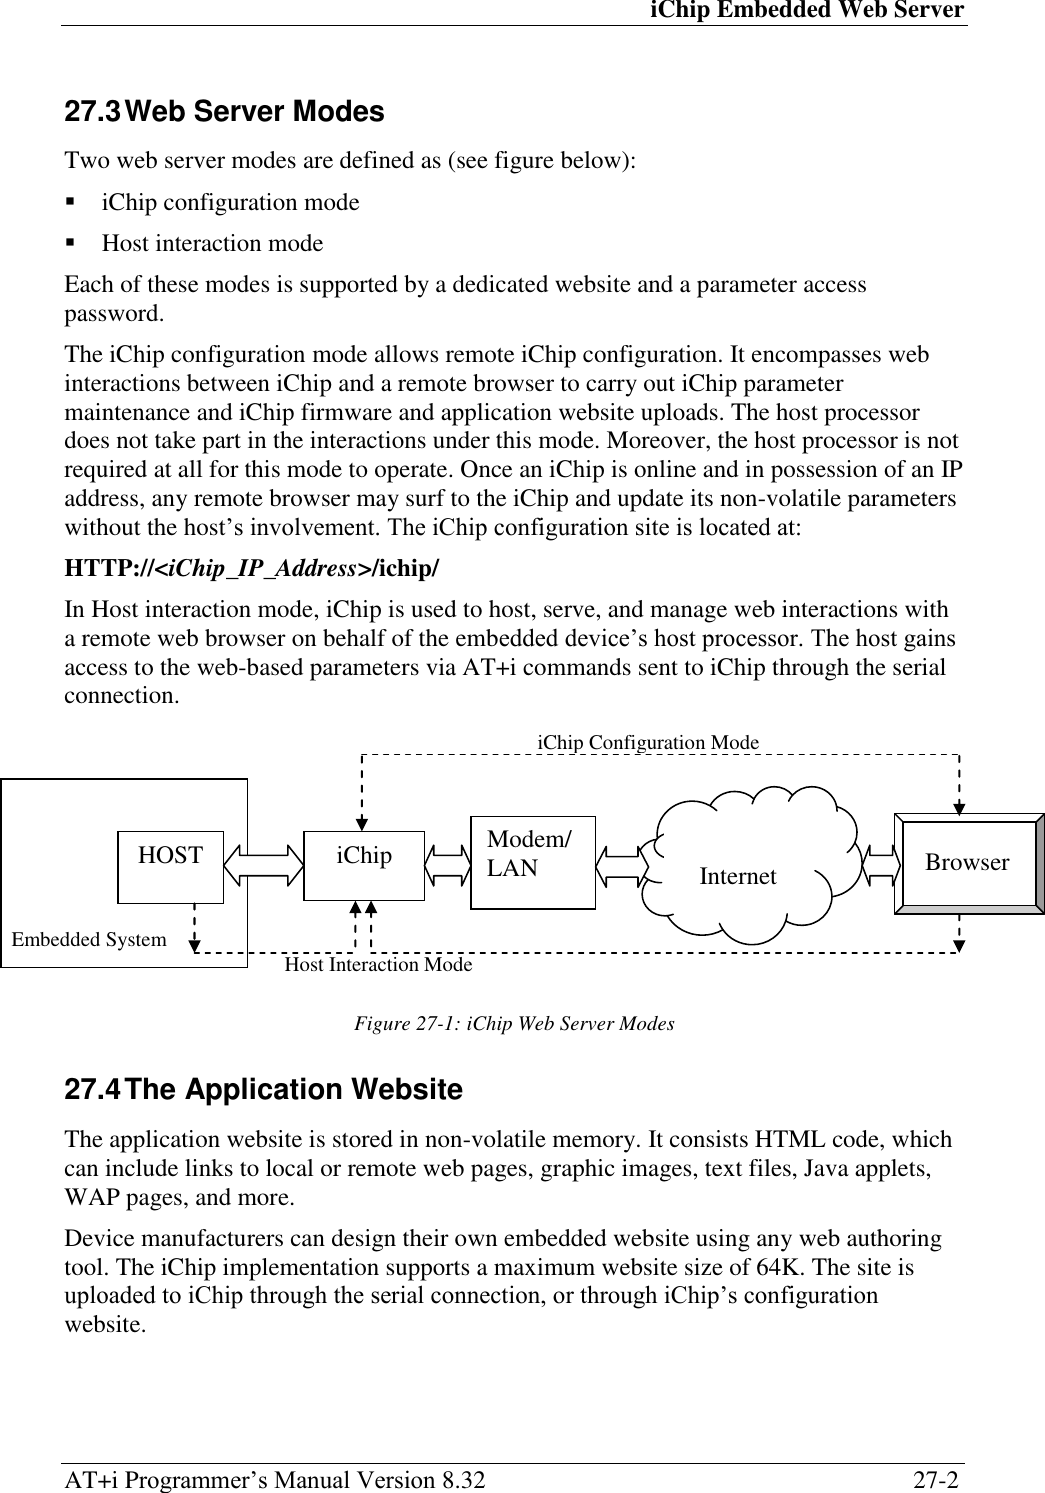 iChip Embedded Web Server AT+i Programmer‘s Manual Version 8.32  27-2 27.3 Web Server Modes Two web server modes are defined as (see figure below):  iChip configuration mode  Host interaction mode Each of these modes is supported by a dedicated website and a parameter access password. The iChip configuration mode allows remote iChip configuration. It encompasses web interactions between iChip and a remote browser to carry out iChip parameter maintenance and iChip firmware and application website uploads. The host processor does not take part in the interactions under this mode. Moreover, the host processor is not required at all for this mode to operate. Once an iChip is online and in possession of an IP address, any remote browser may surf to the iChip and update its non-volatile parameters without the host‘s involvement. The iChip configuration site is located at: HTTP://&lt;iChip_IP_Address&gt;/ichip/ In Host interaction mode, iChip is used to host, serve, and manage web interactions with a remote web browser on behalf of the embedded device‘s host processor. The host gains access to the web-based parameters via AT+i commands sent to iChip through the serial connection.        Figure 27-1: iChip Web Server Modes 27.4 The Application Website The application website is stored in non-volatile memory. It consists HTML code, which can include links to local or remote web pages, graphic images, text files, Java applets, WAP pages, and more. Device manufacturers can design their own embedded website using any web authoring tool. The iChip implementation supports a maximum website size of 64K. The site is uploaded to iChip through the serial connection, or through iChip‘s configuration website. Host Interaction Mode iChip Configuration Mode HOST iChip Modem/ LAN   Internet Browser Embedded System 